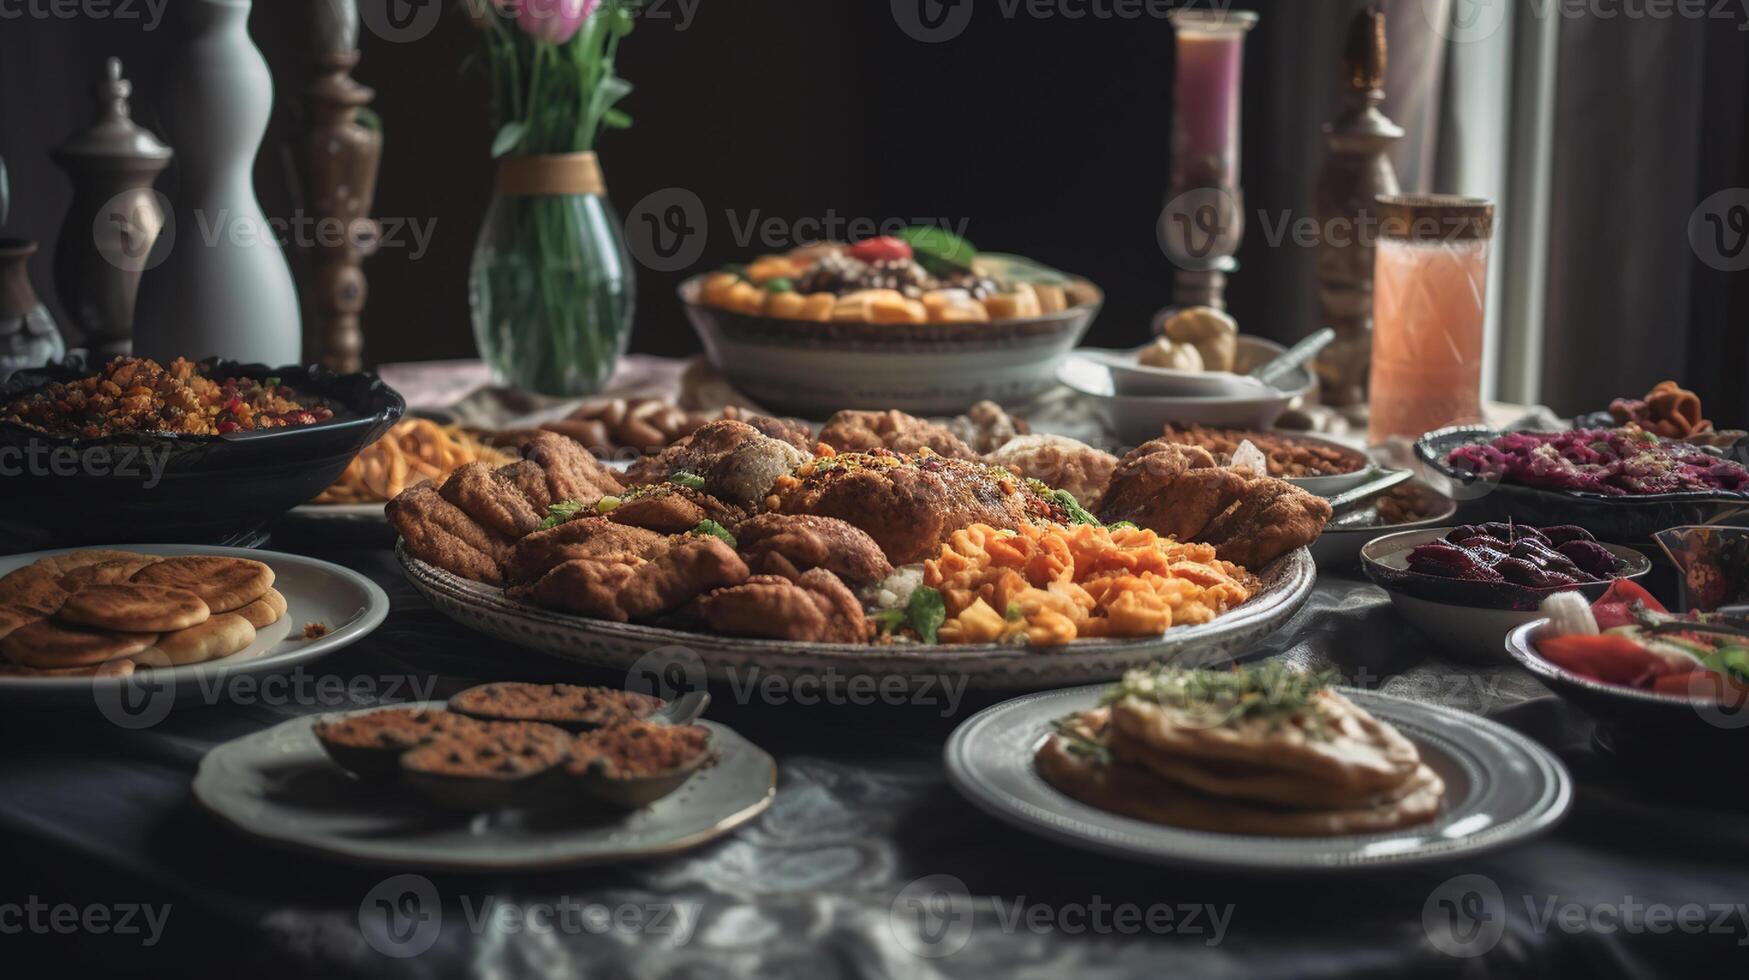 Traditional Eastern dishes on table. Celebration of Eid al-Fitr, photo